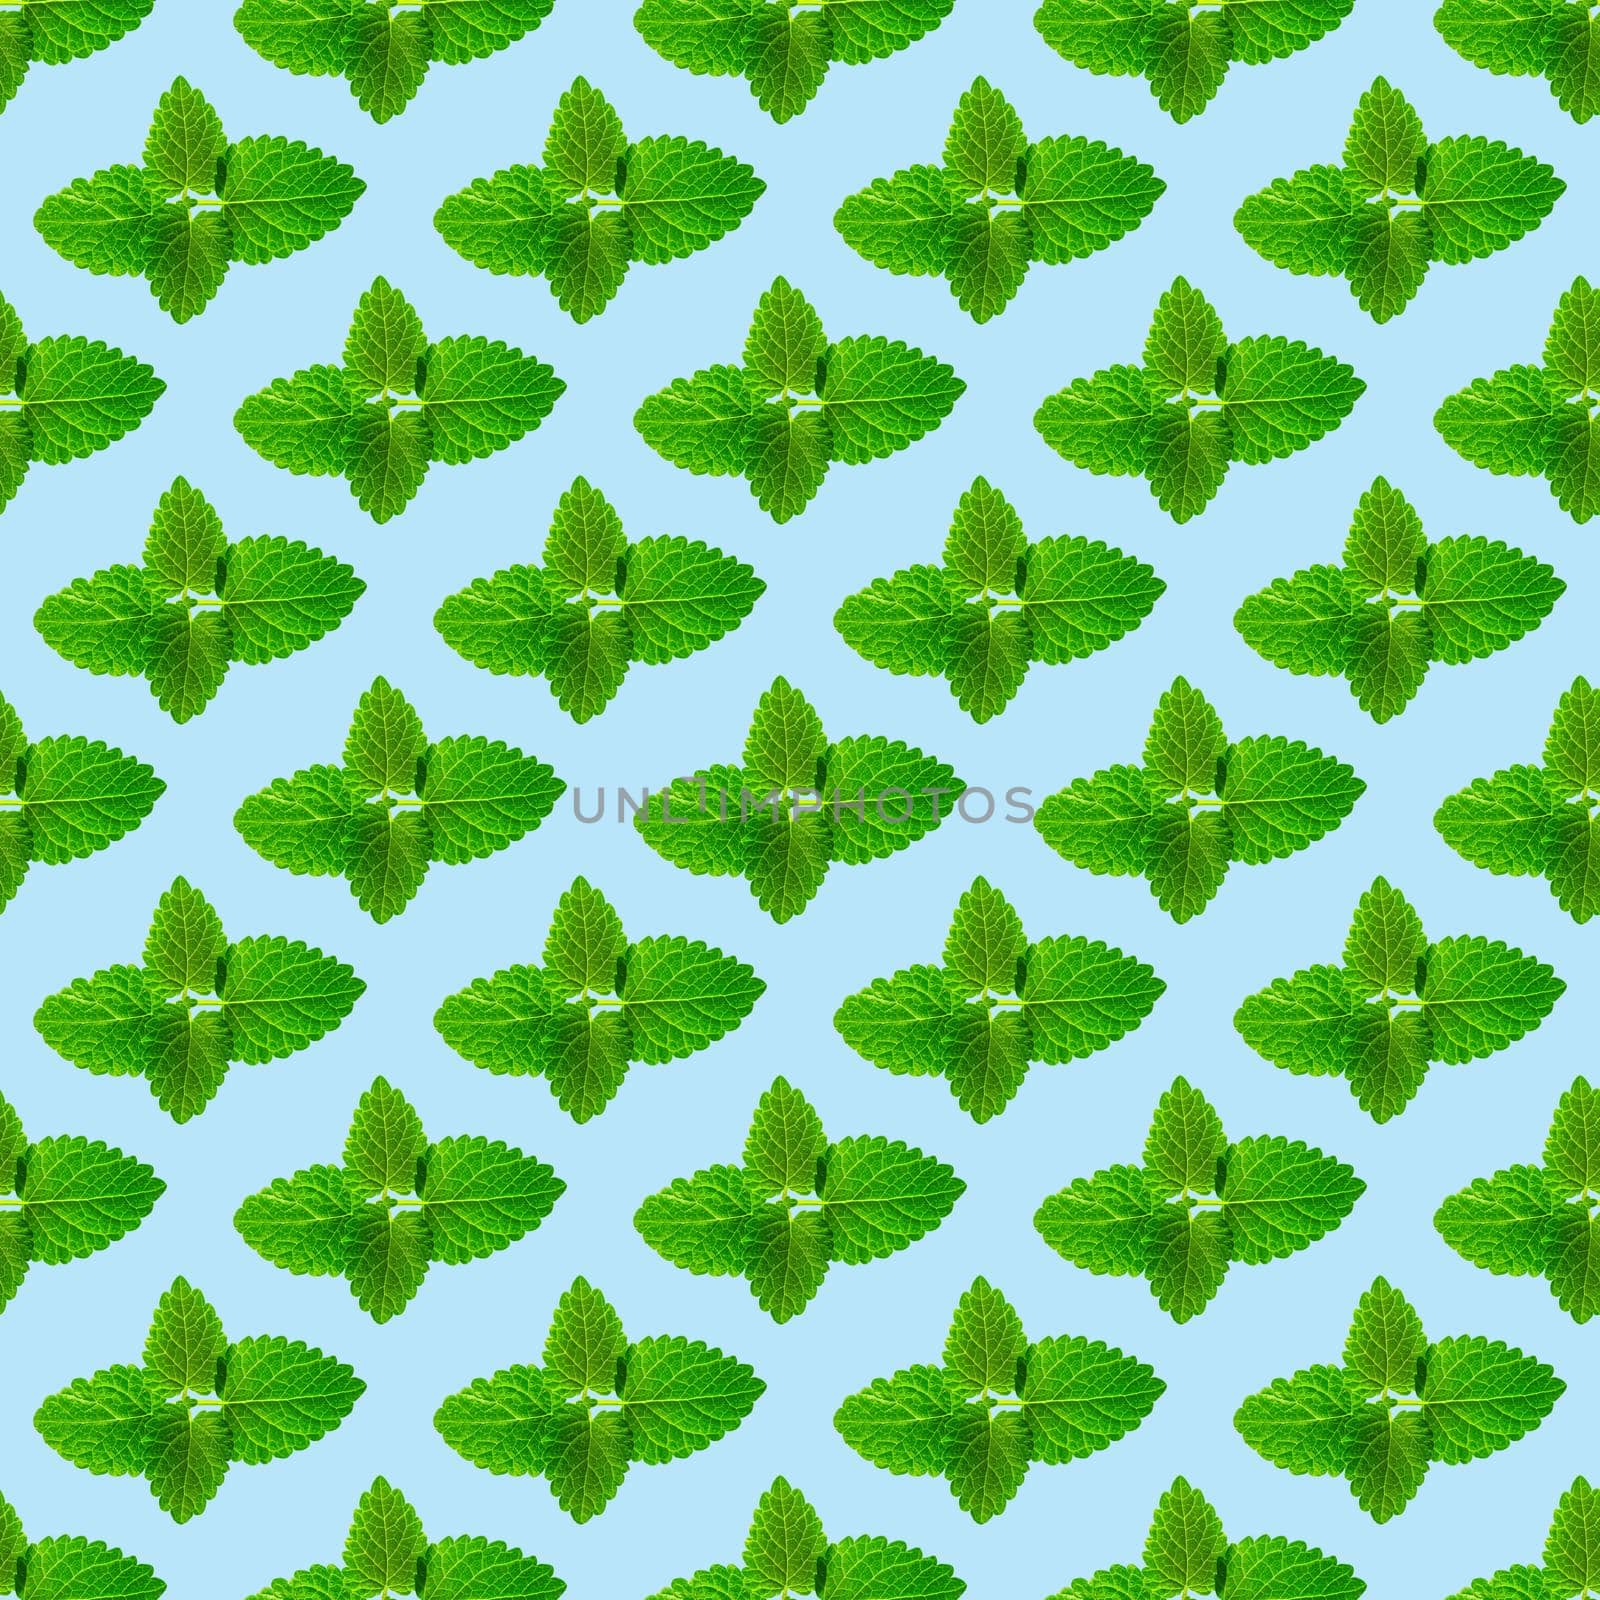 Seamless pattern of fresh mint leaves on blue background for packaging design. peppermint abstract background.